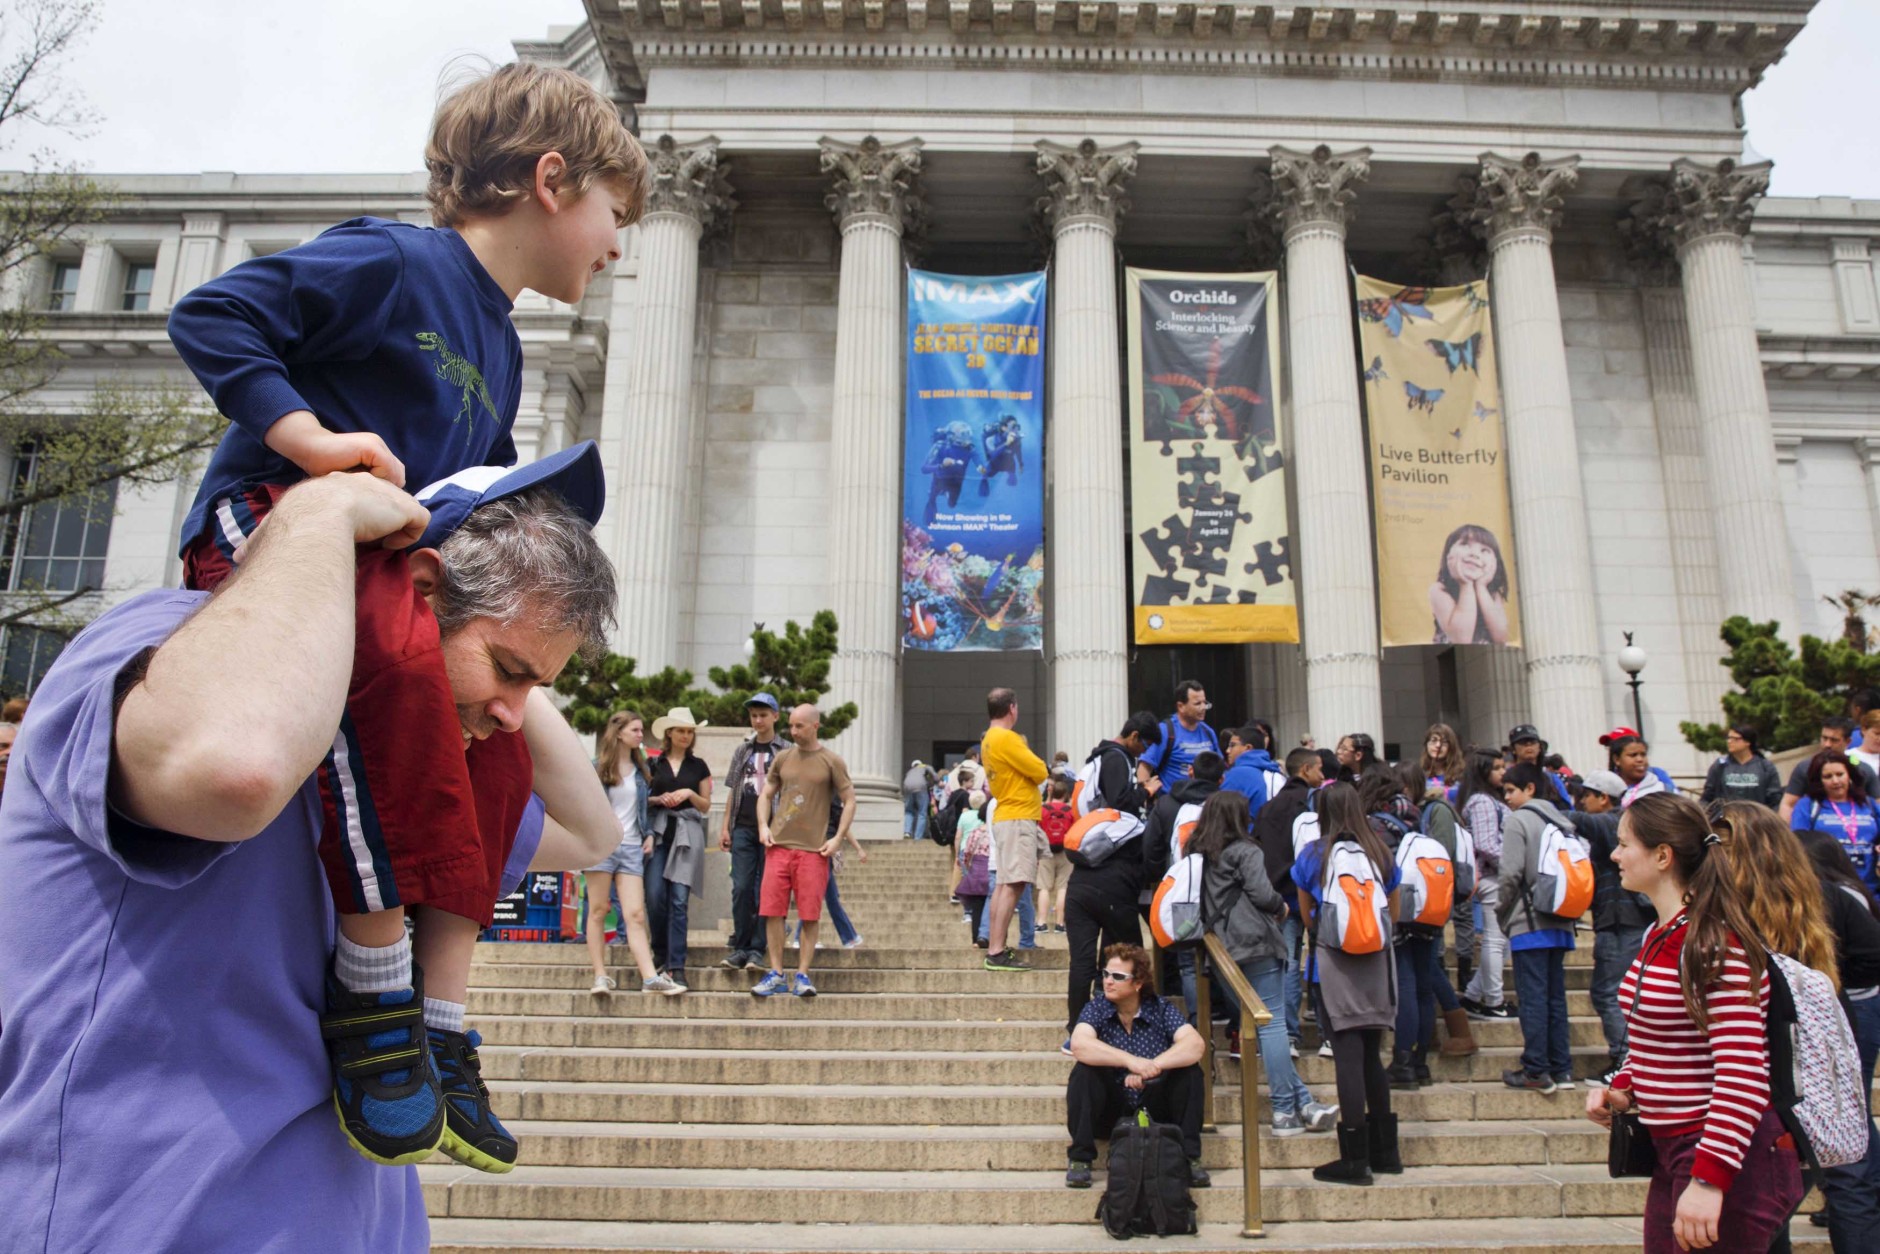 Chris Cellini of Charlotte, N.C., left, lifts his son Aiden Cellini, 5, onto his shoulders after a visit to the Natural History Museum on the National Mall in Washington, Tuesday, April 7, 2015. Widespread power outages affected the White House, State Department, Capitol and other sites across Washington and its suburbs Tuesday afternoon — all because of an explosion at a power plant in southern Maryland, an official said. (AP Photo/Jacquelyn Martin)